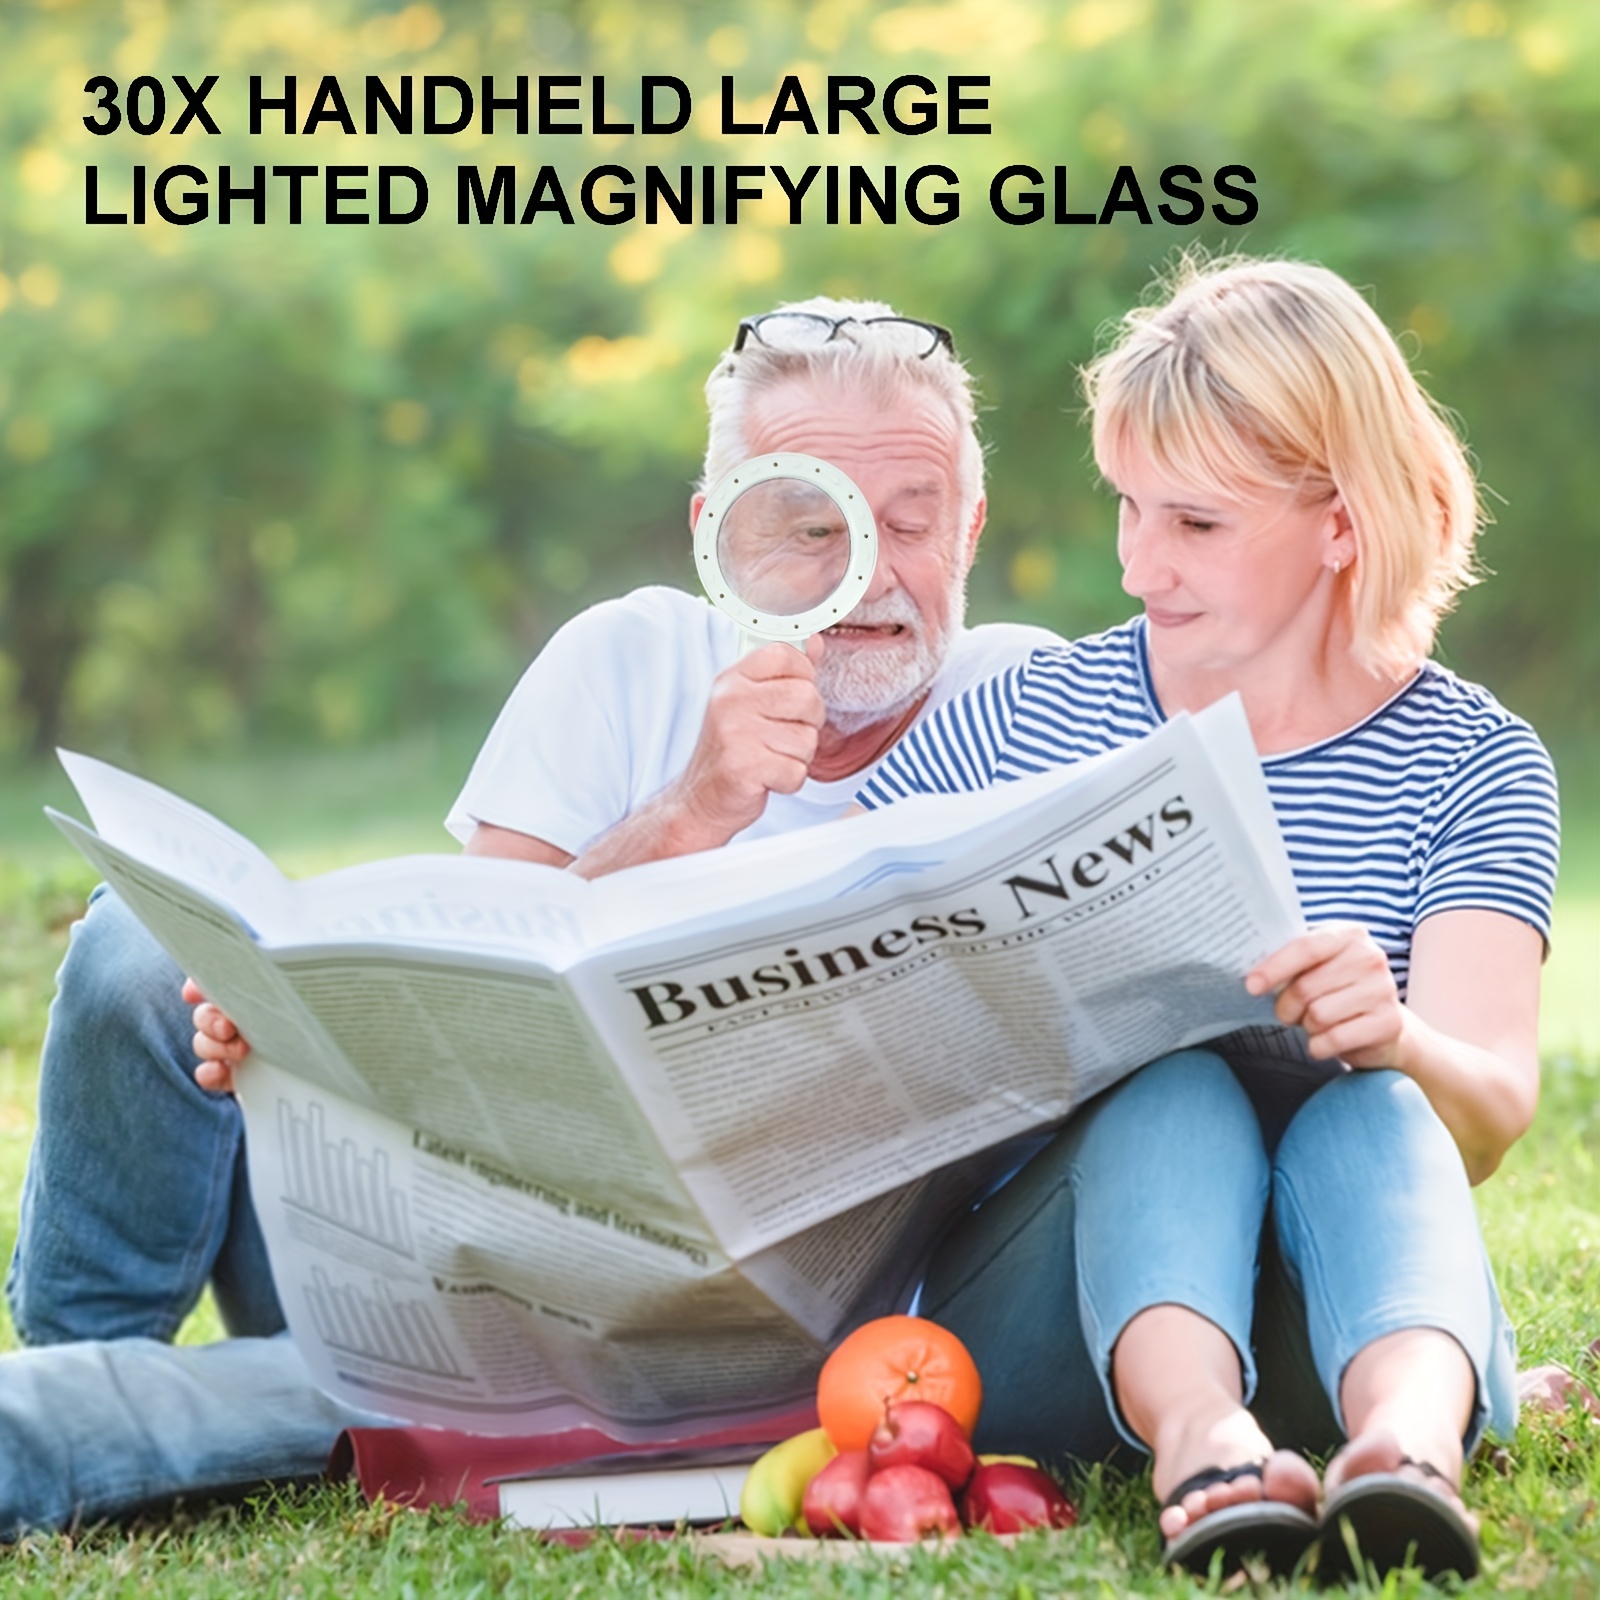 Magnifying Glass with Light,30X High Power Jumbo Lighted Magnifier Lens for  Seniors Reading Small Print,Stamps, Map,Inspection, M